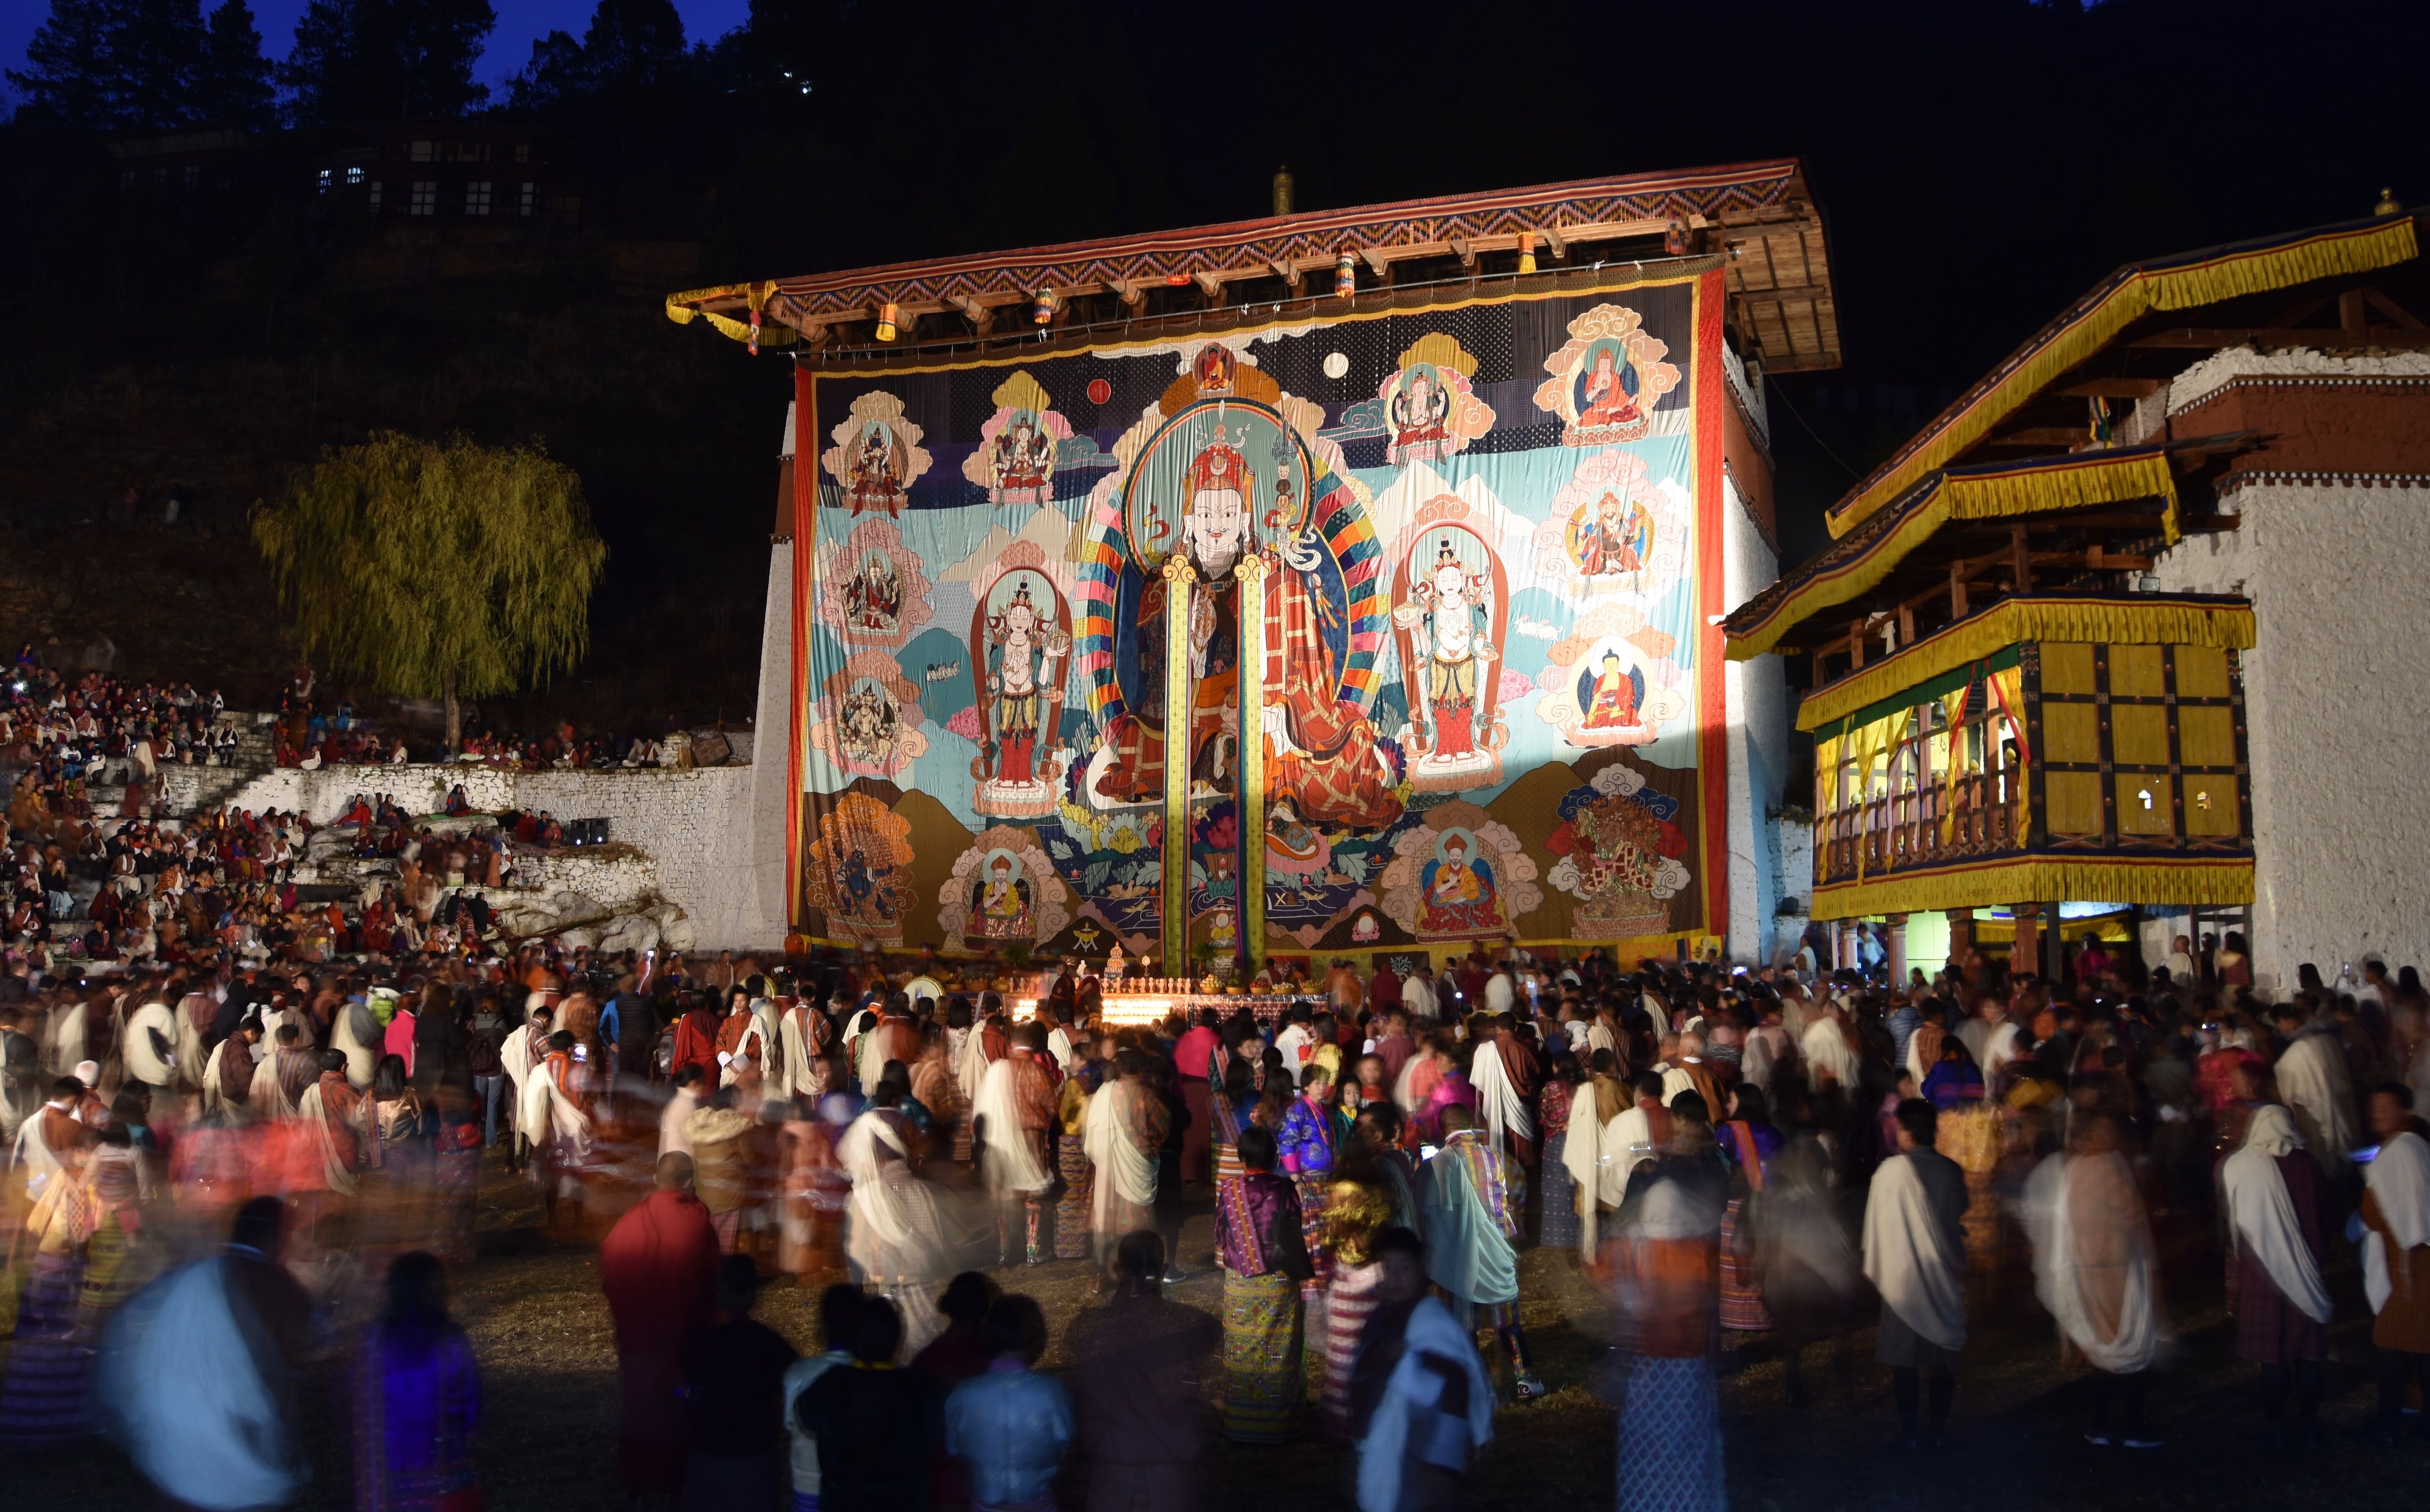 Long before dawn on the last day of the Paro Tsechu, devotees flock to the unfurling of a precious appliqué banner (called a Thongdrol) depicting Padmasambhava, one of Bhutan's most revered Buddhist saints.  To witness the Thongdrol is to receive a great blessing. 